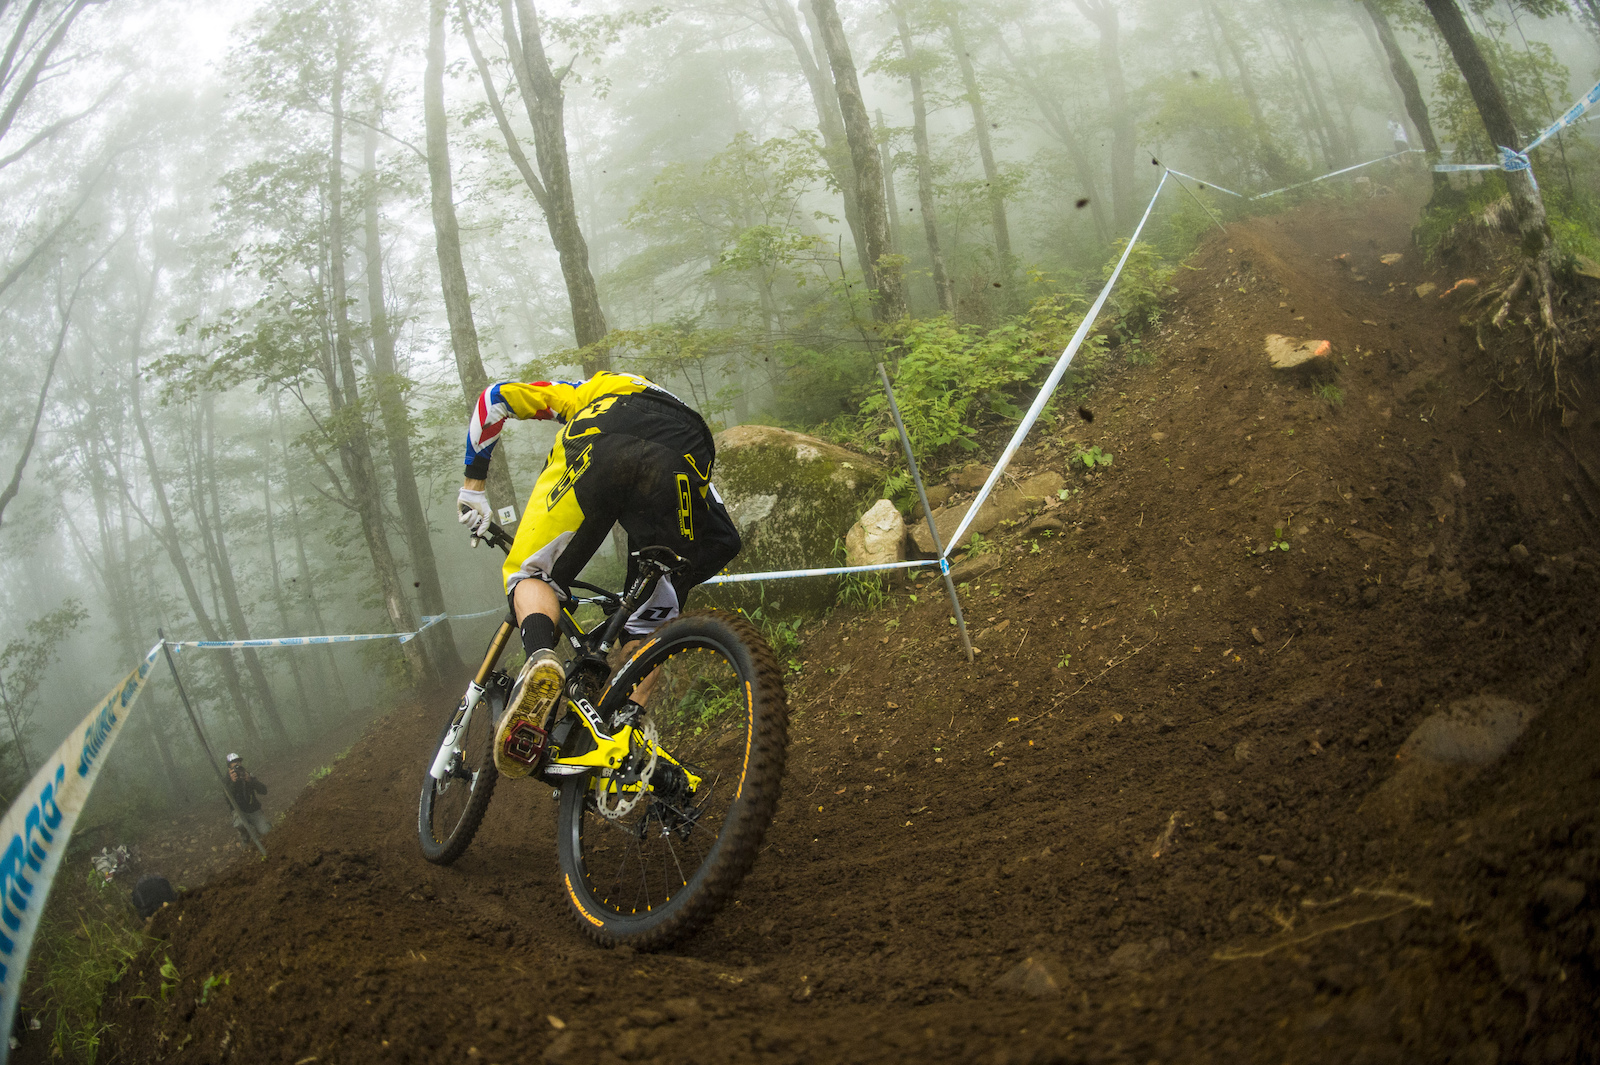 racing to qualify at the 2013 edition of the UCI MTB World Cup at Mt St Anne in Quebec, Canada.